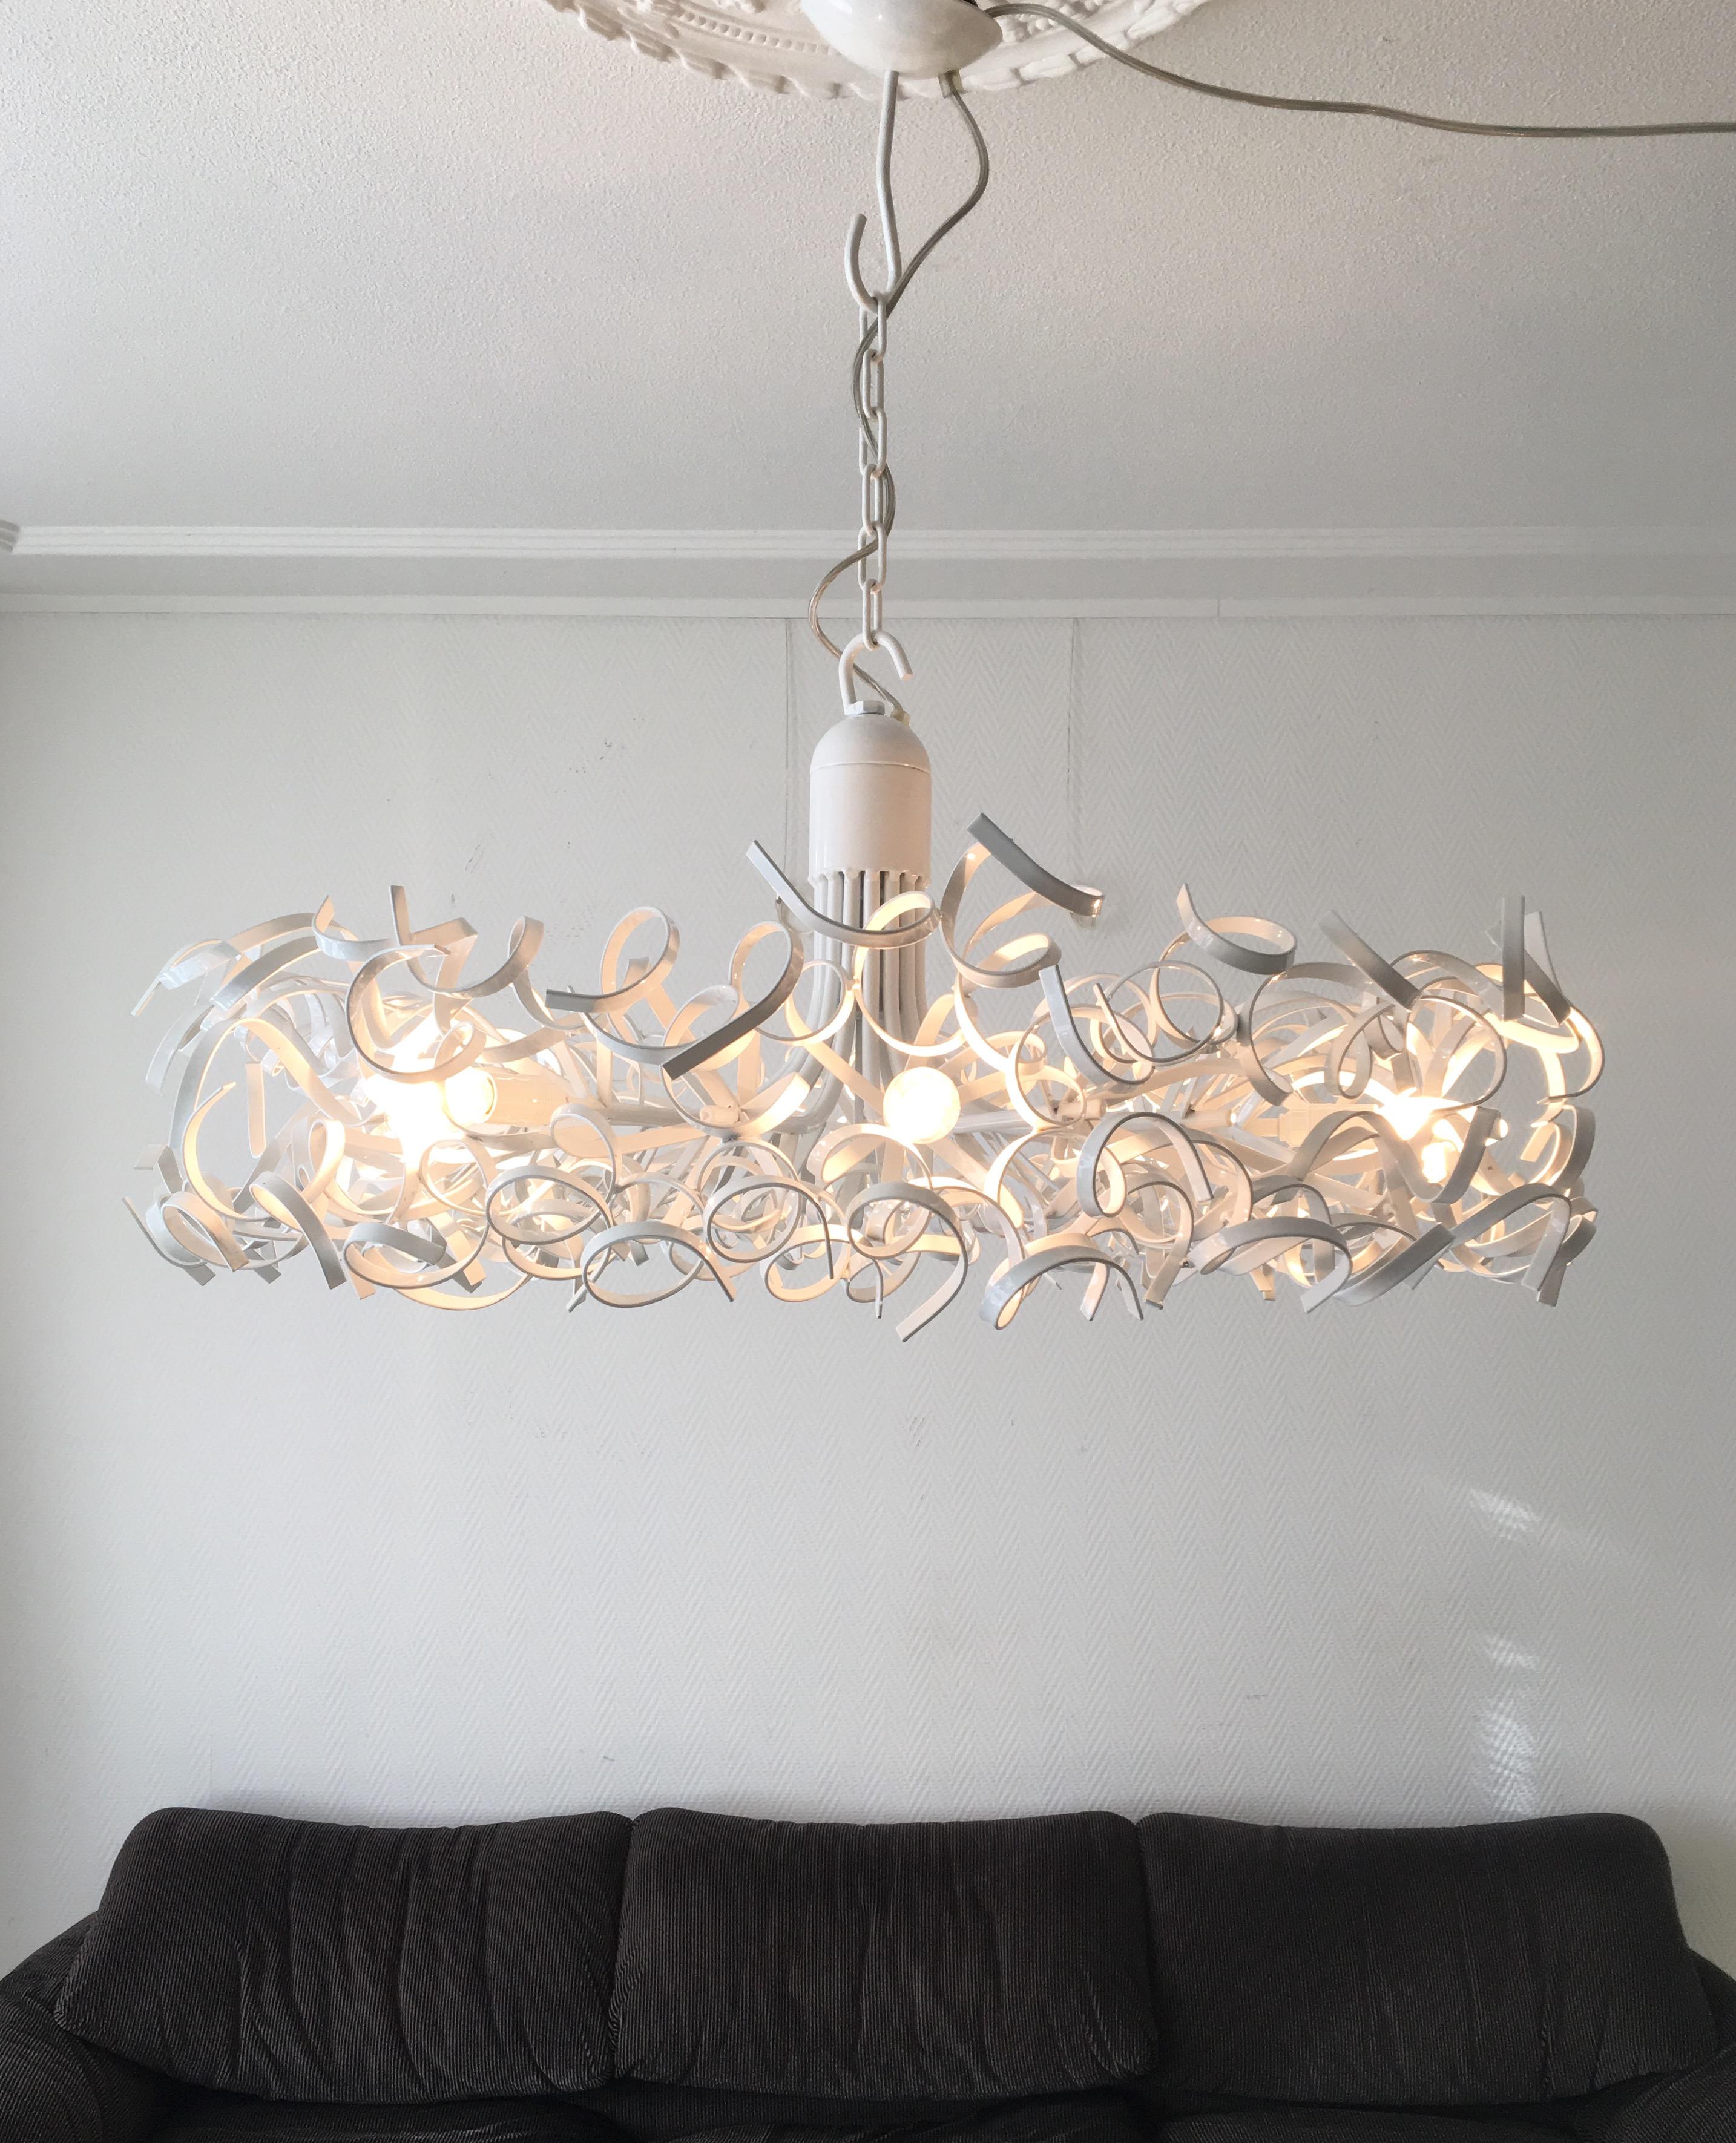 Lacquered Chic, Handmade, White, Stainless Steel Chandelier 